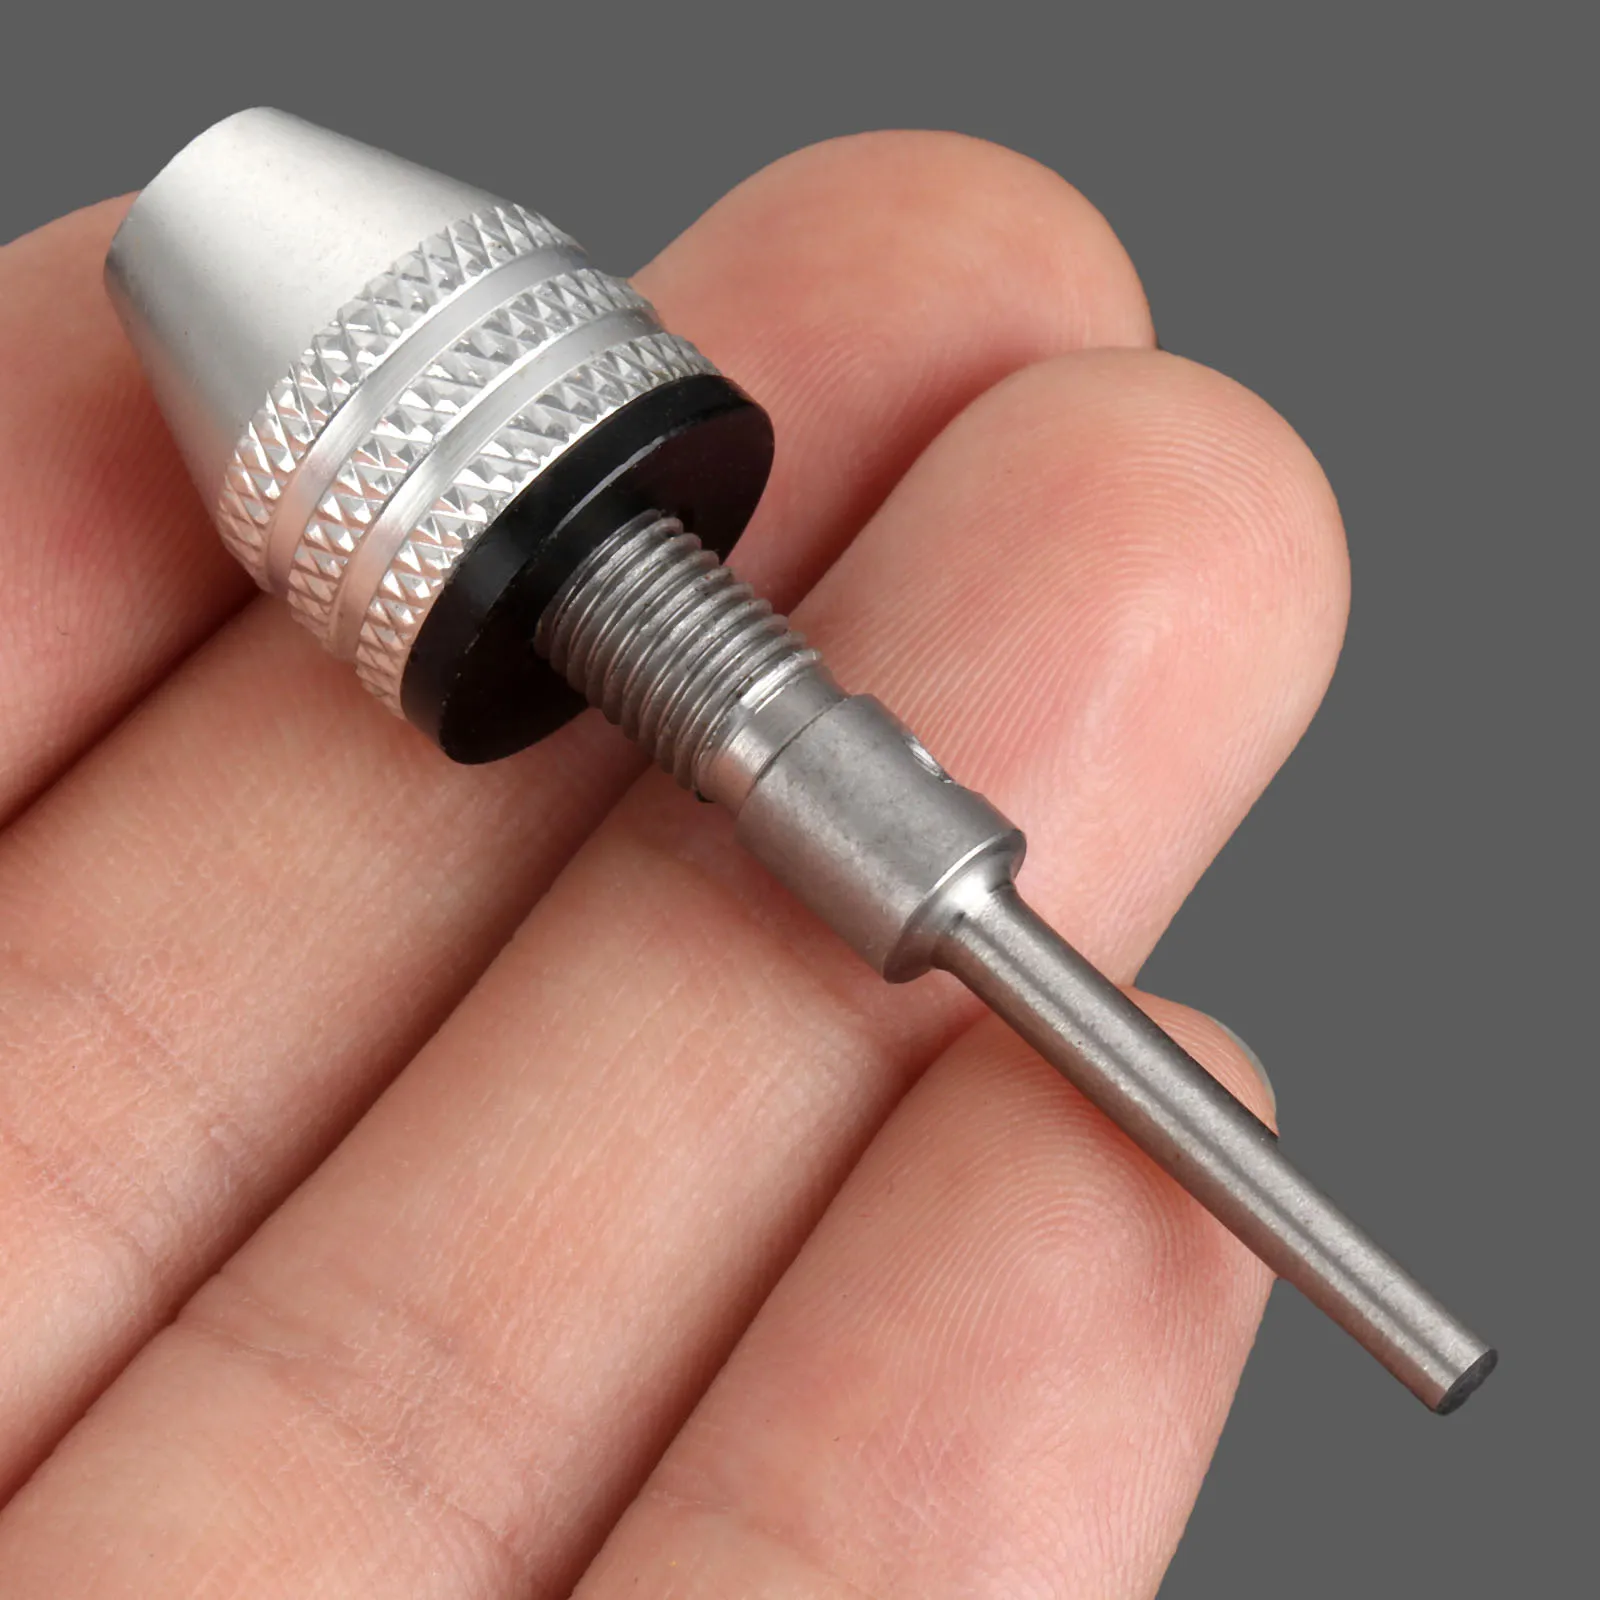 3mm Shank Mini Drill Chuck Adapter Converter For Power Impact Driver Grinding Engraving Machine Conversion Drill Chuck 0.3-3.4mm impact testing machine lens impact testing machine impact tester